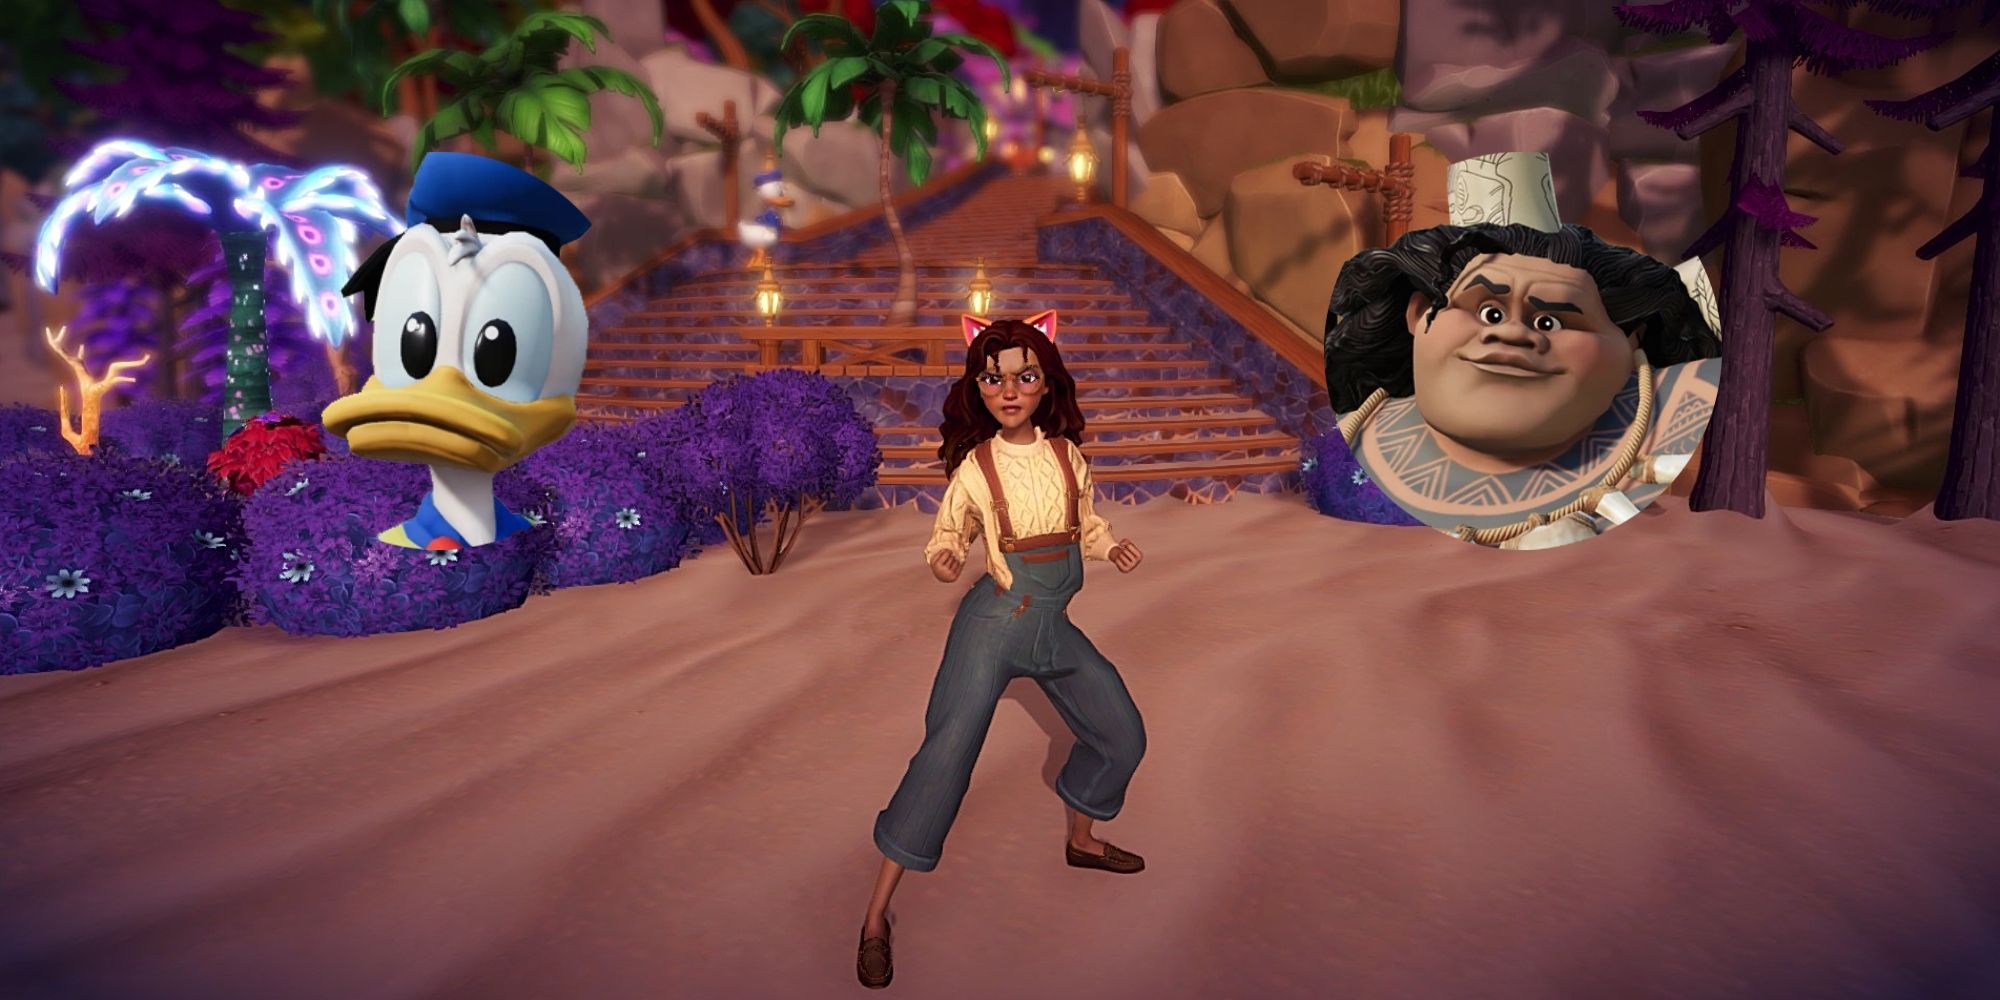 Disney Dreamlight Valley player posing with angery and donald with maui's face on either side